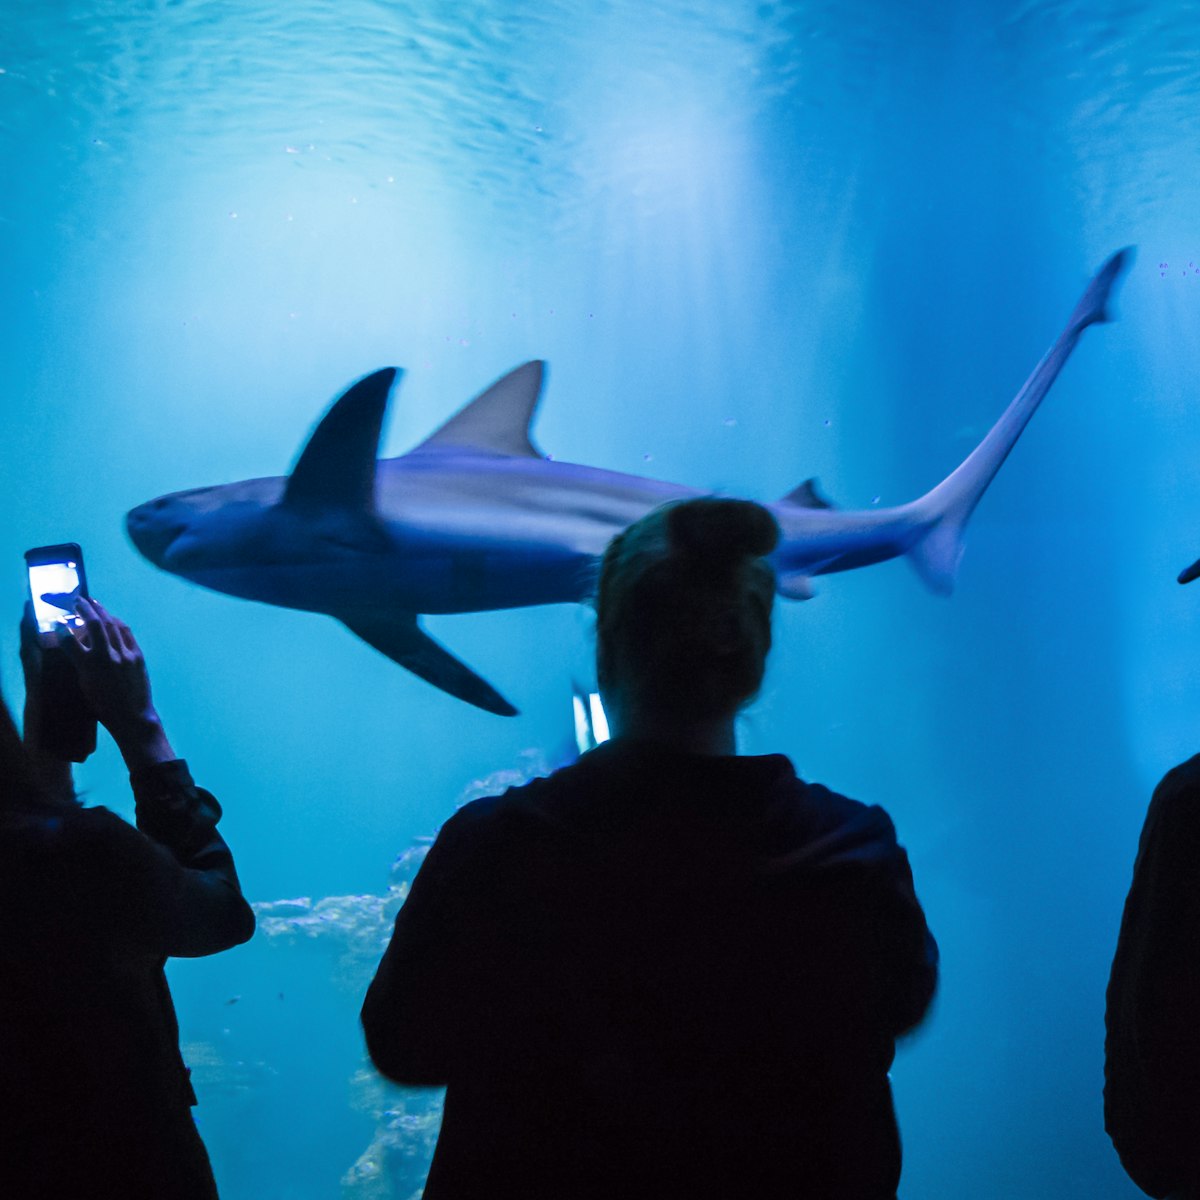 People photographing shark in fishtank